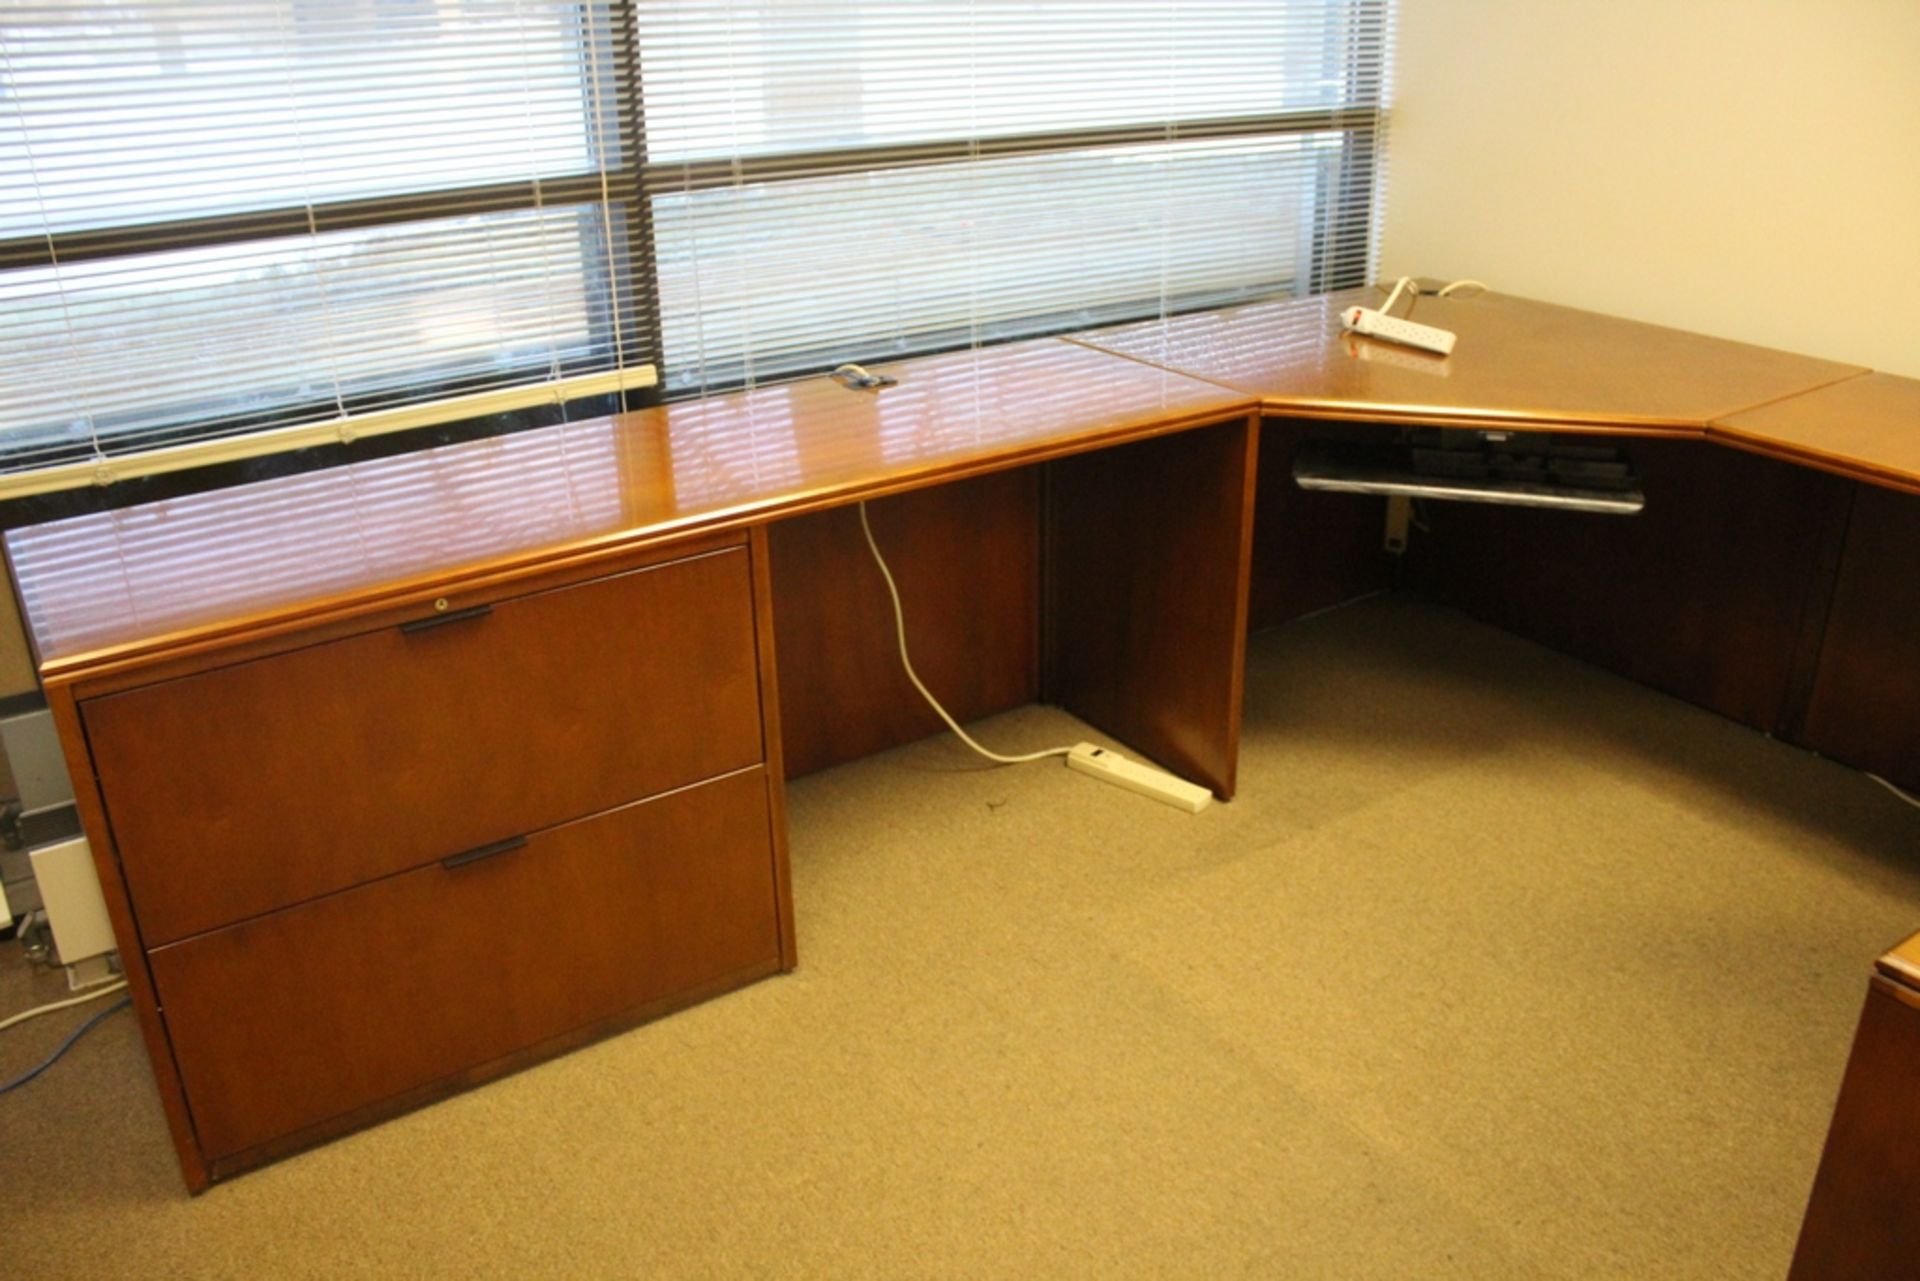 U-SHAPED OFFICE DESK, 114" X 72" WITH CREDENZA - Image 3 of 5